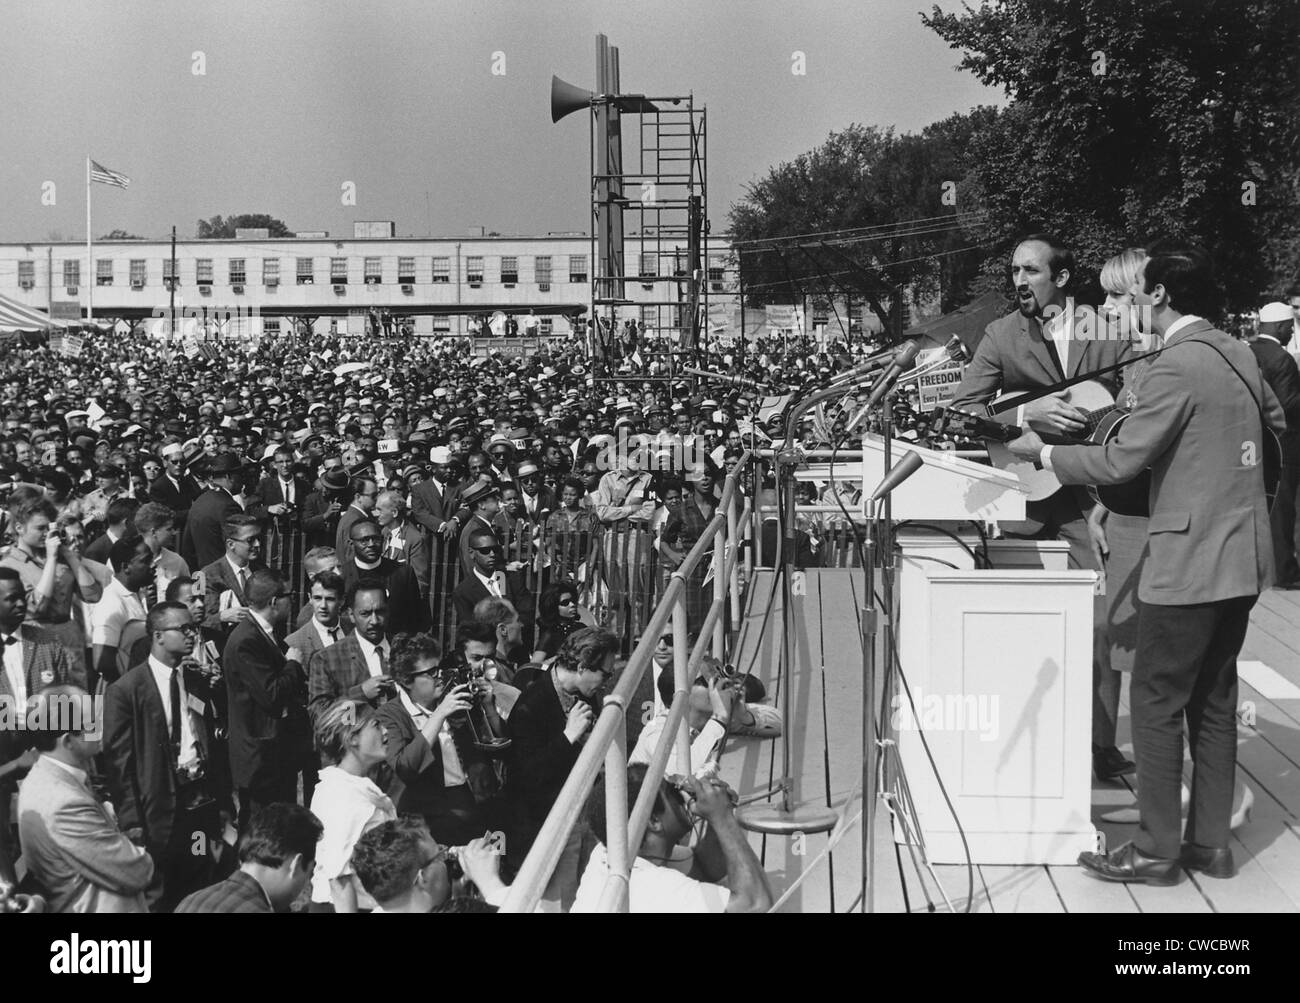 Folk singers Peter, Paul, and Mary performing at the 1963 Civil Rights March on Washington. Aug. 28, 1963. Stock Photo